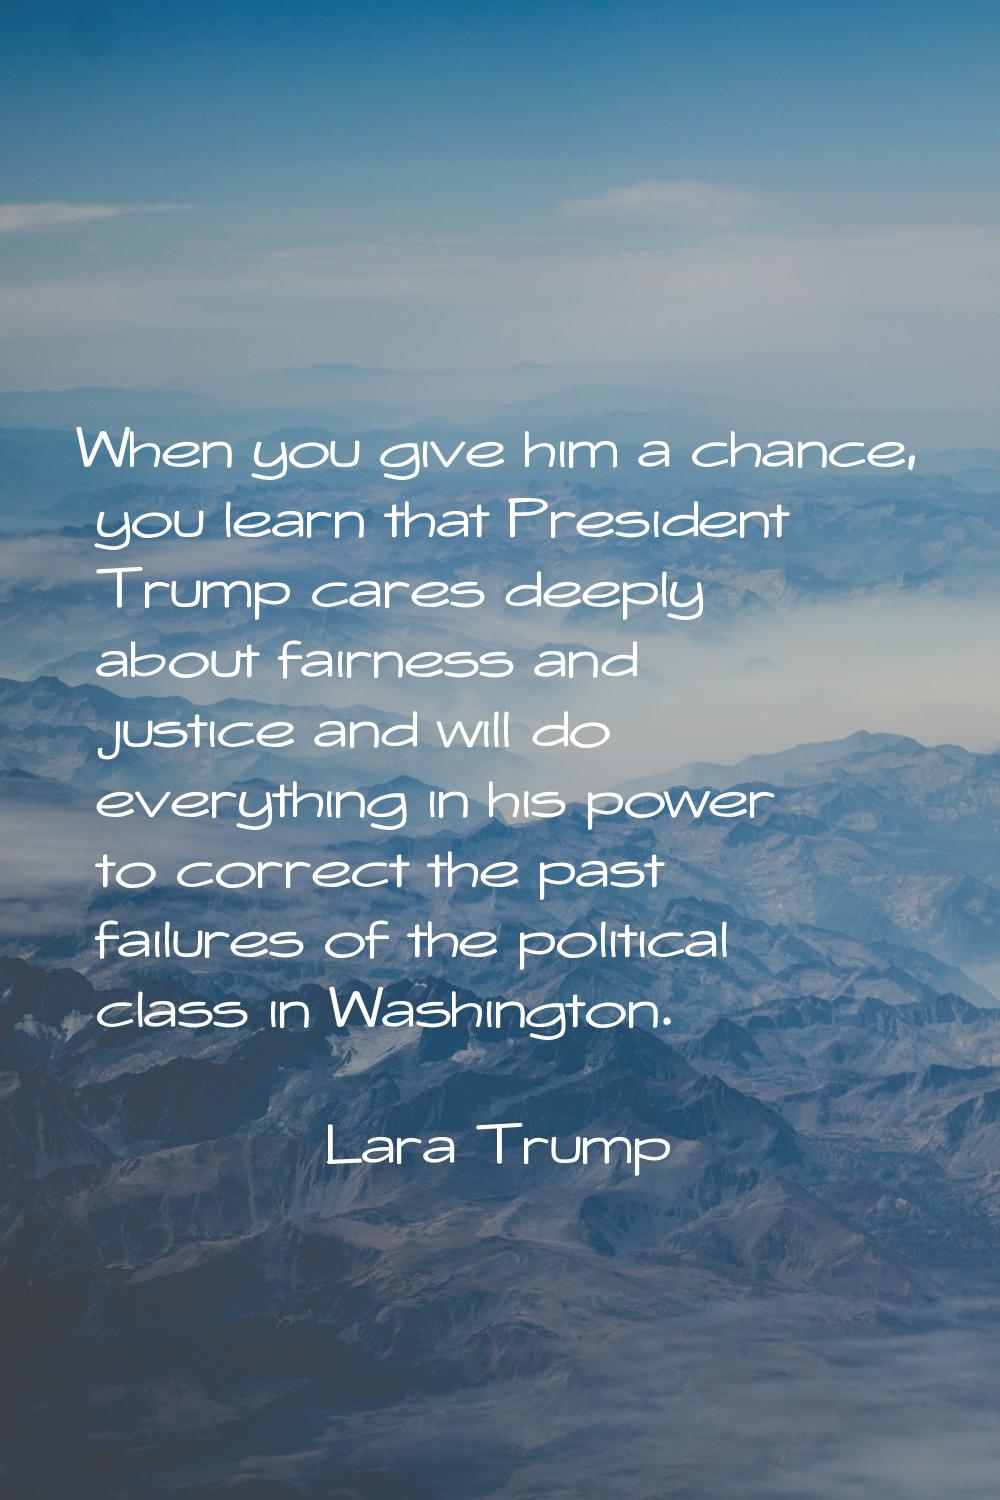 When you give him a chance, you learn that President Trump cares deeply about fairness and justice 